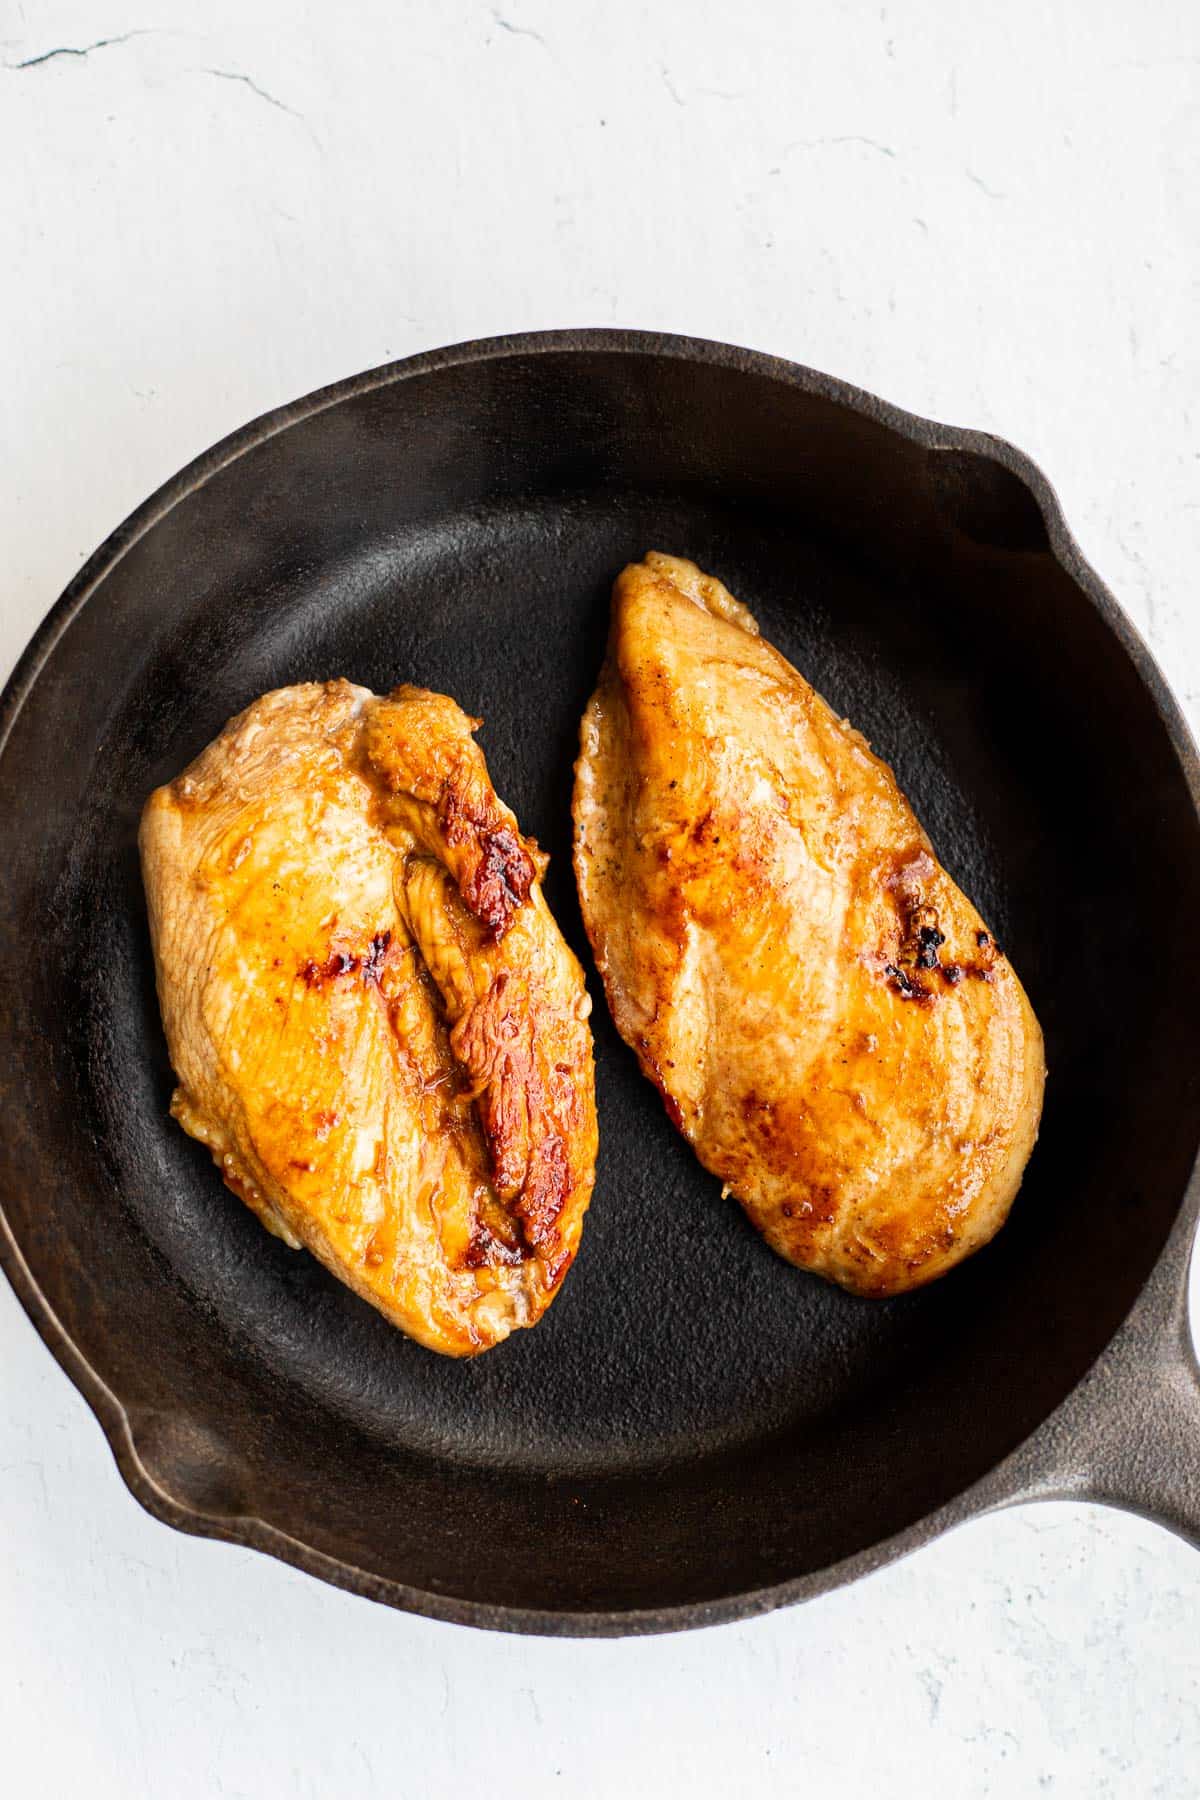 marinated chicken breasts cooked in a cast iron pan.